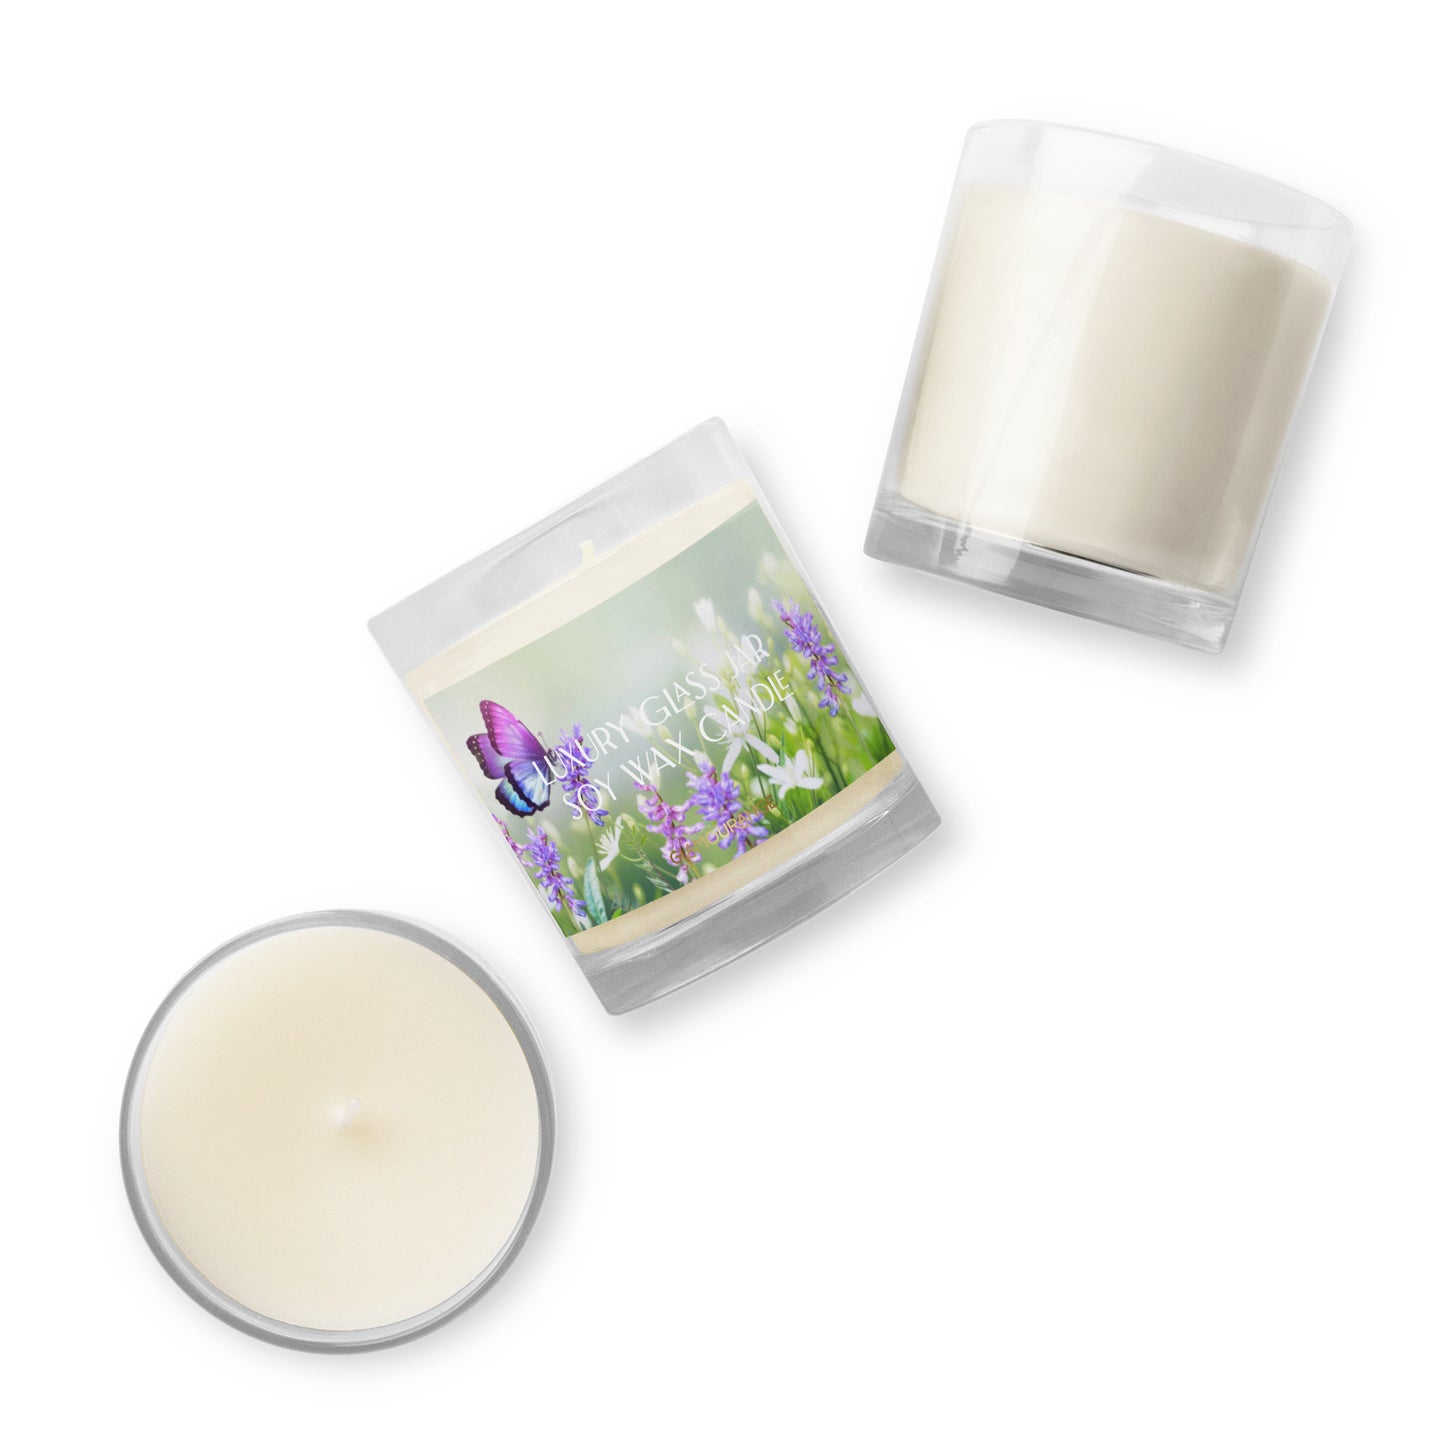 Glass Jar Soy Wax Candle (Calming Plant - Nature Label 0020)